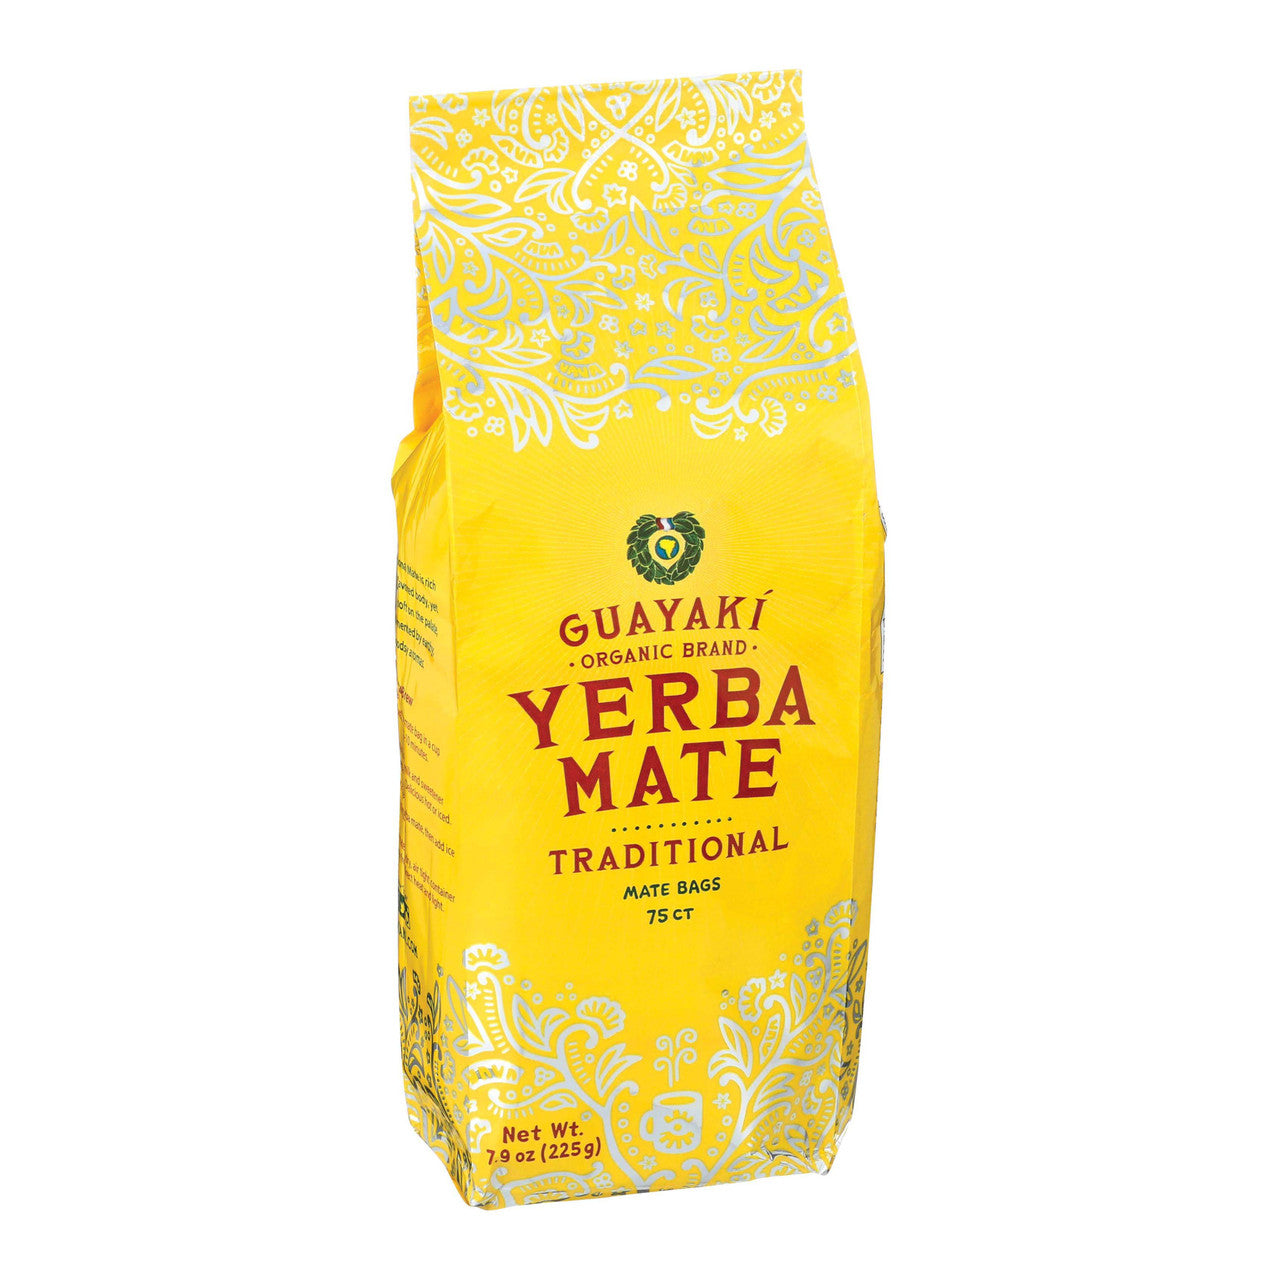 Guayaki Organic Yerba Mate Traditional Mate Bags, 75 count, 225g/7.9 oz., (Imported from Canada)